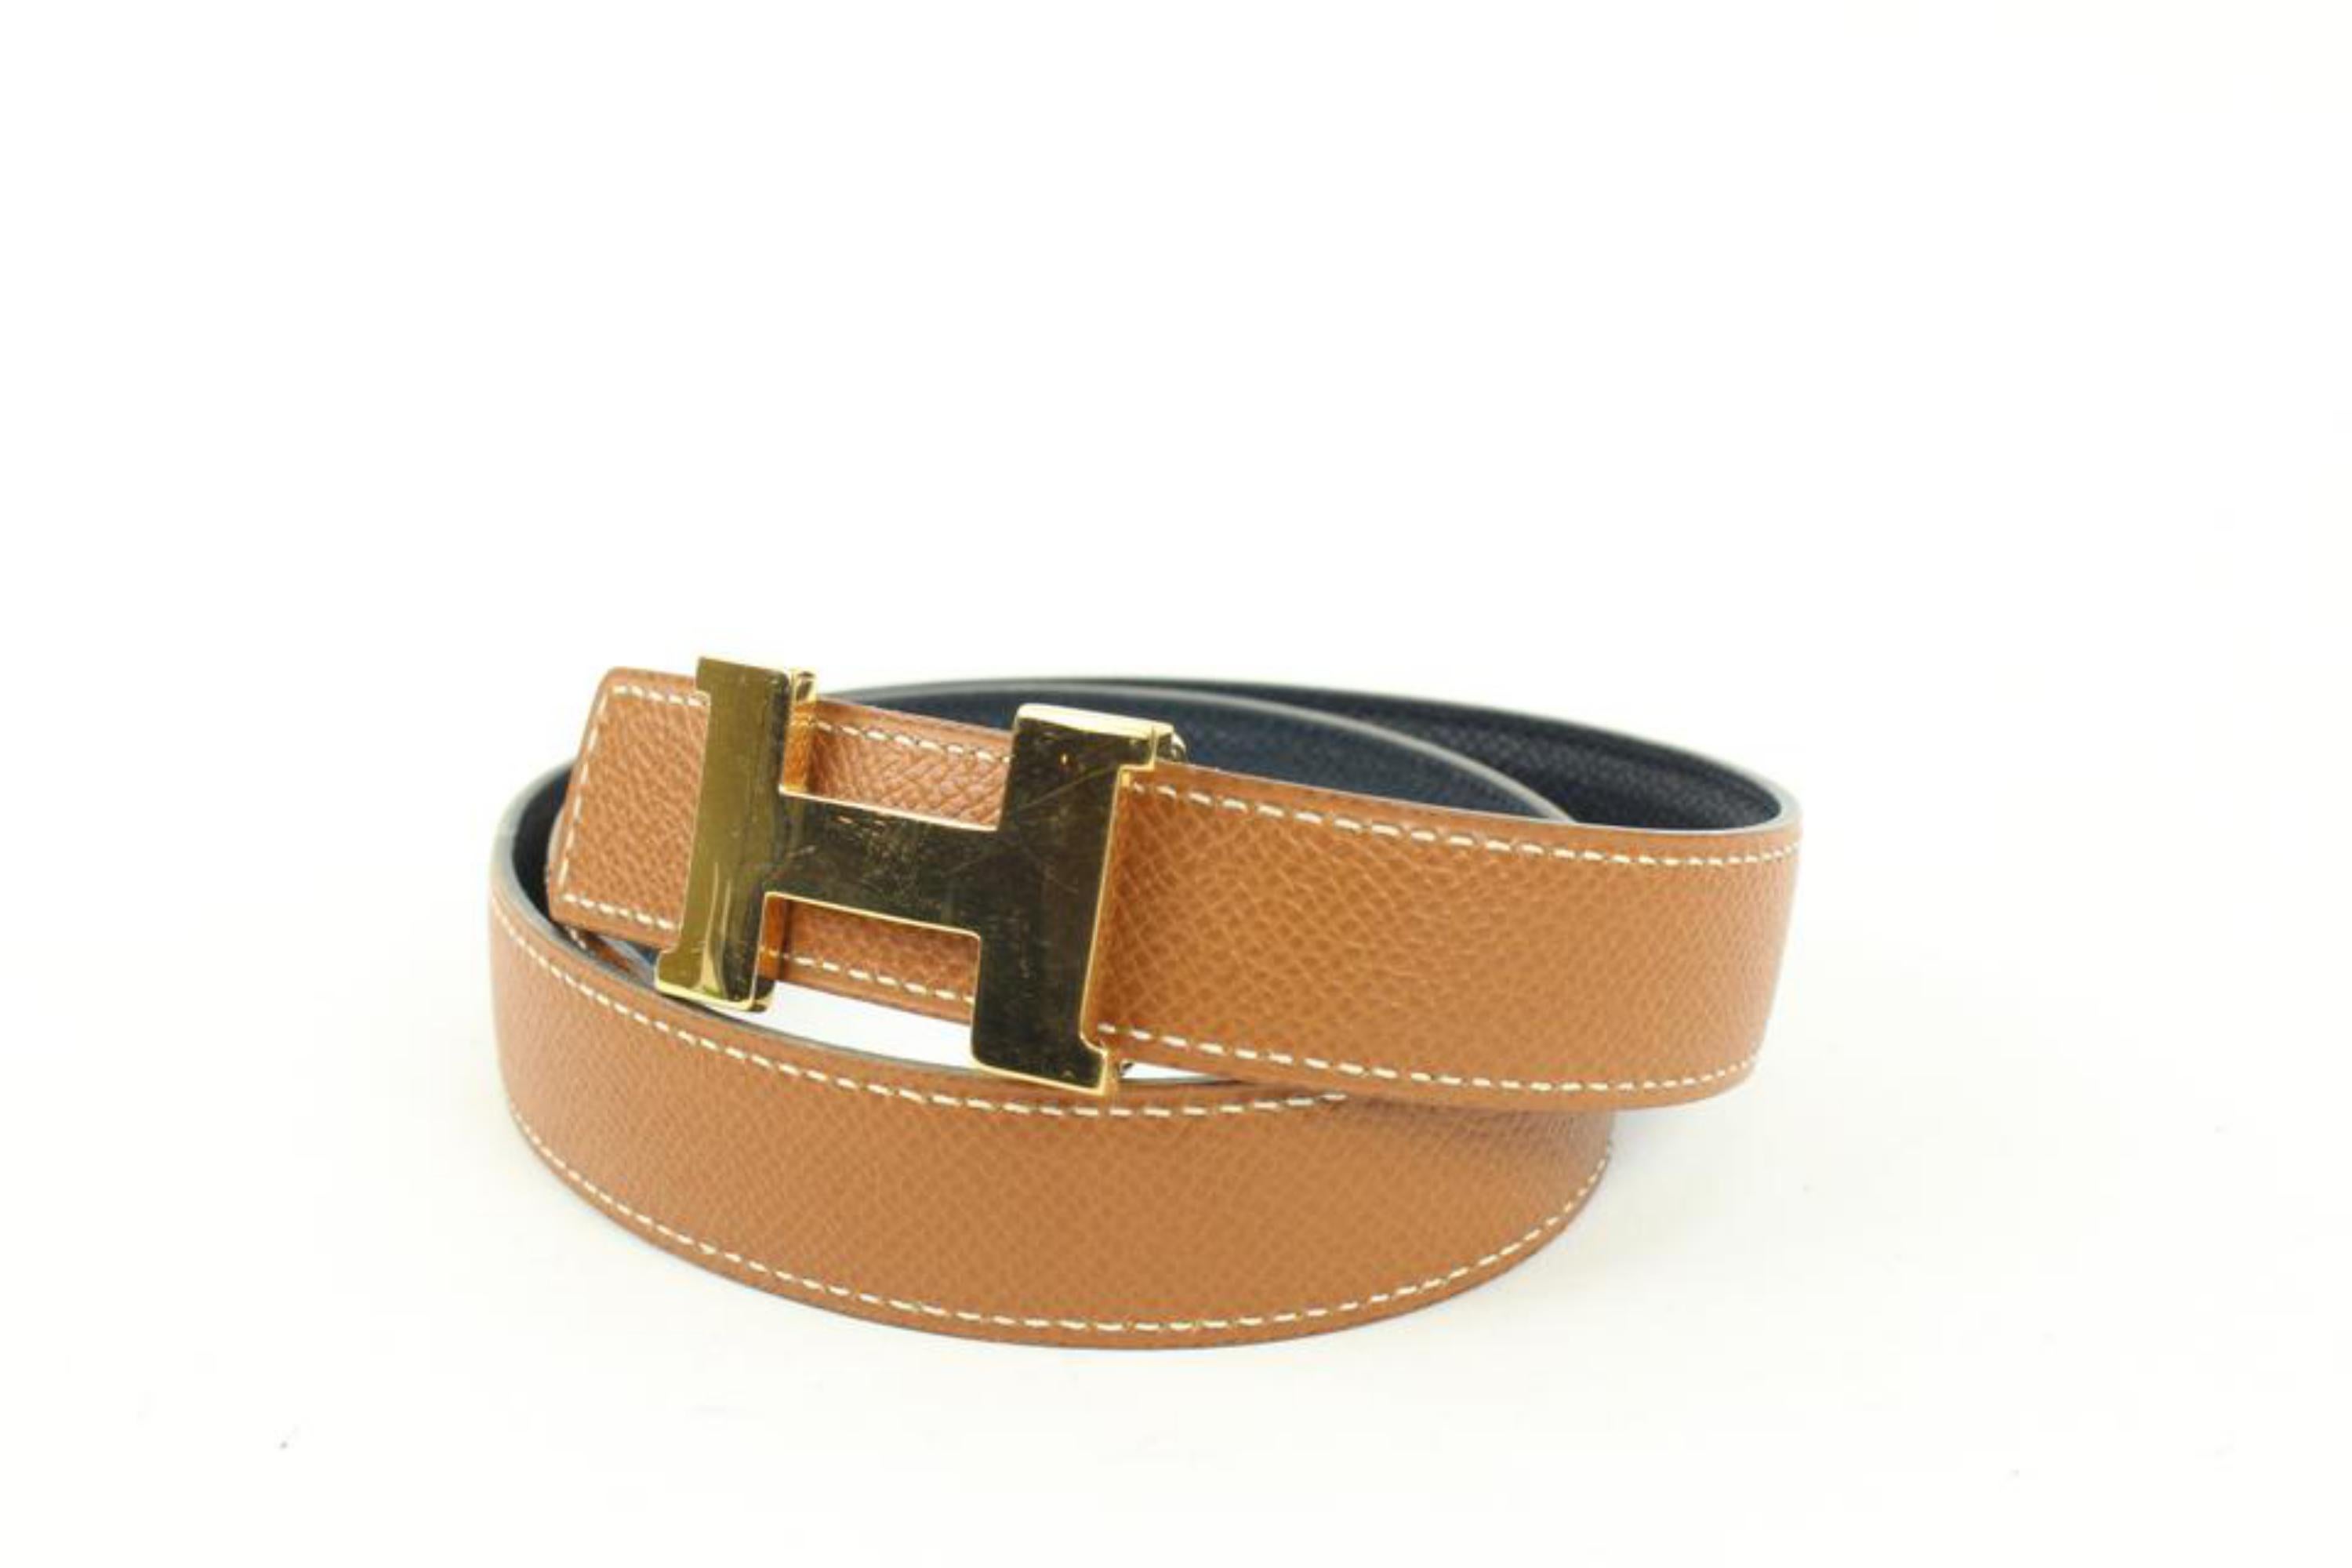 Hermès 24mm Brown x Navy Reveresible H Logo Belt Kit 55h128s
Date Code/Serial Number: A in a Square
Made In: France
Measurements: Length:  29.5